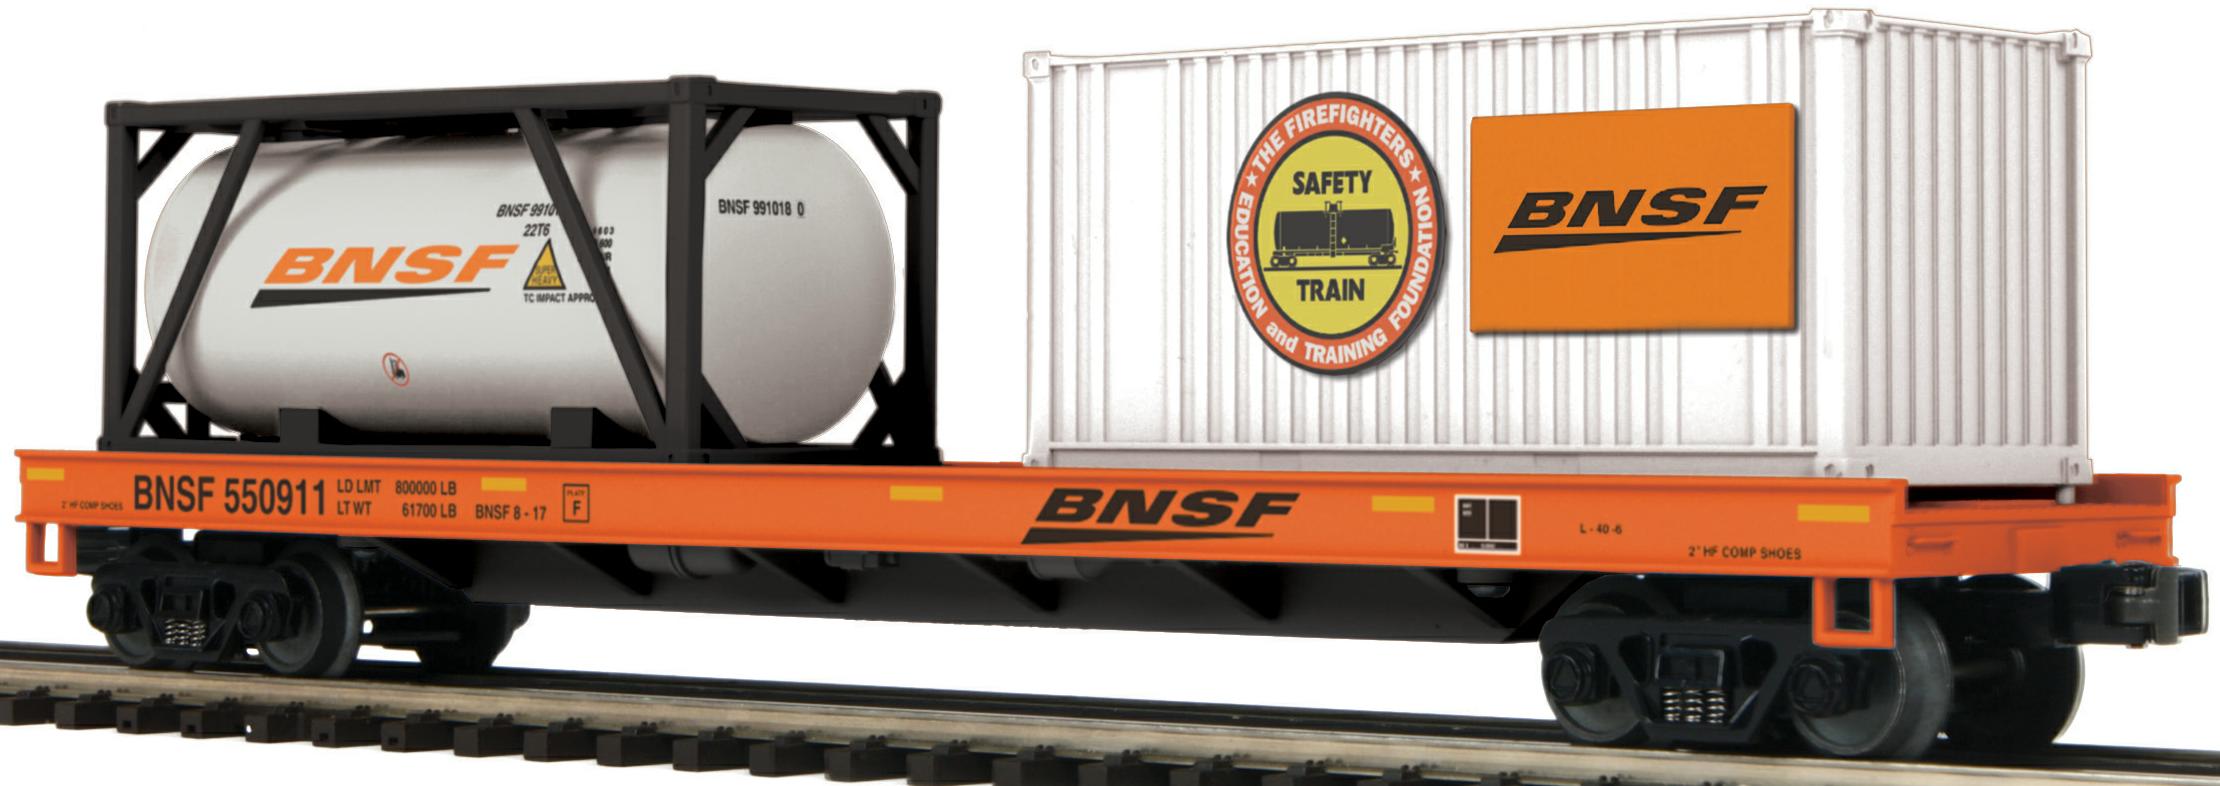 BNSF Flat Car w/(1) Tank Container and (1) 20' Container image